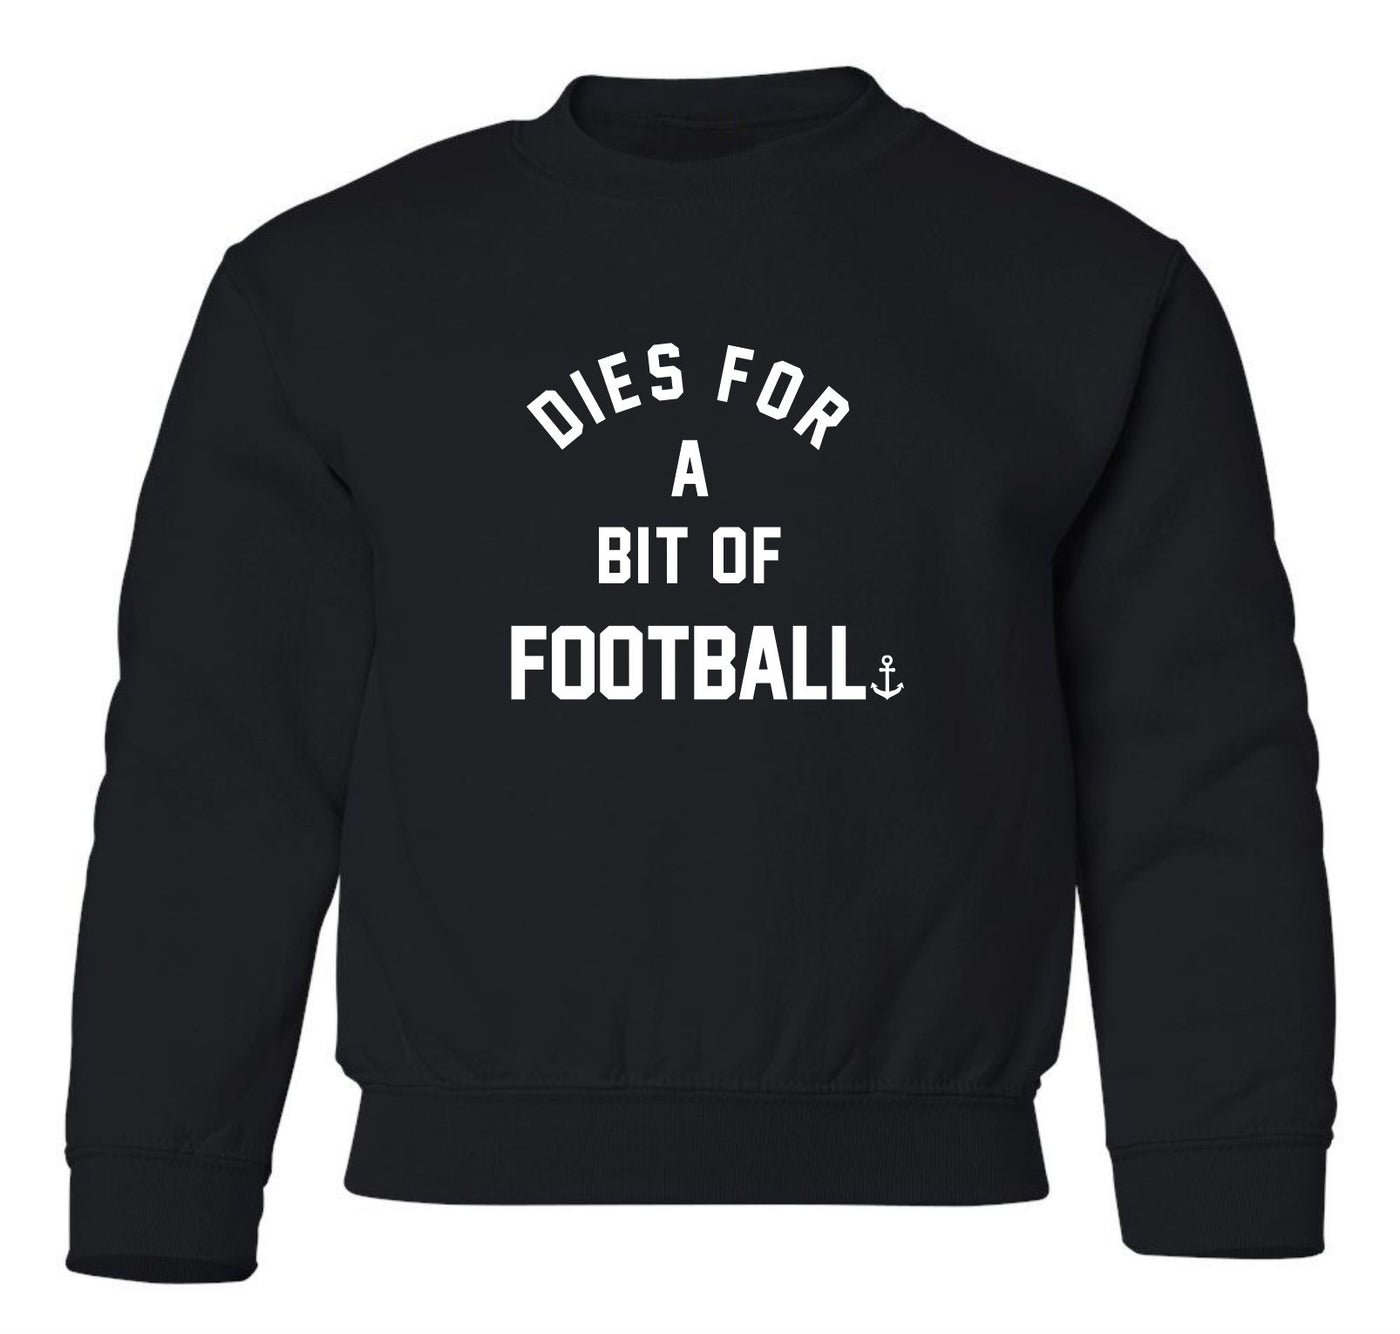 "Dies For A Bit Of Football" Toddler/Youth Crewneck Sweatshirt